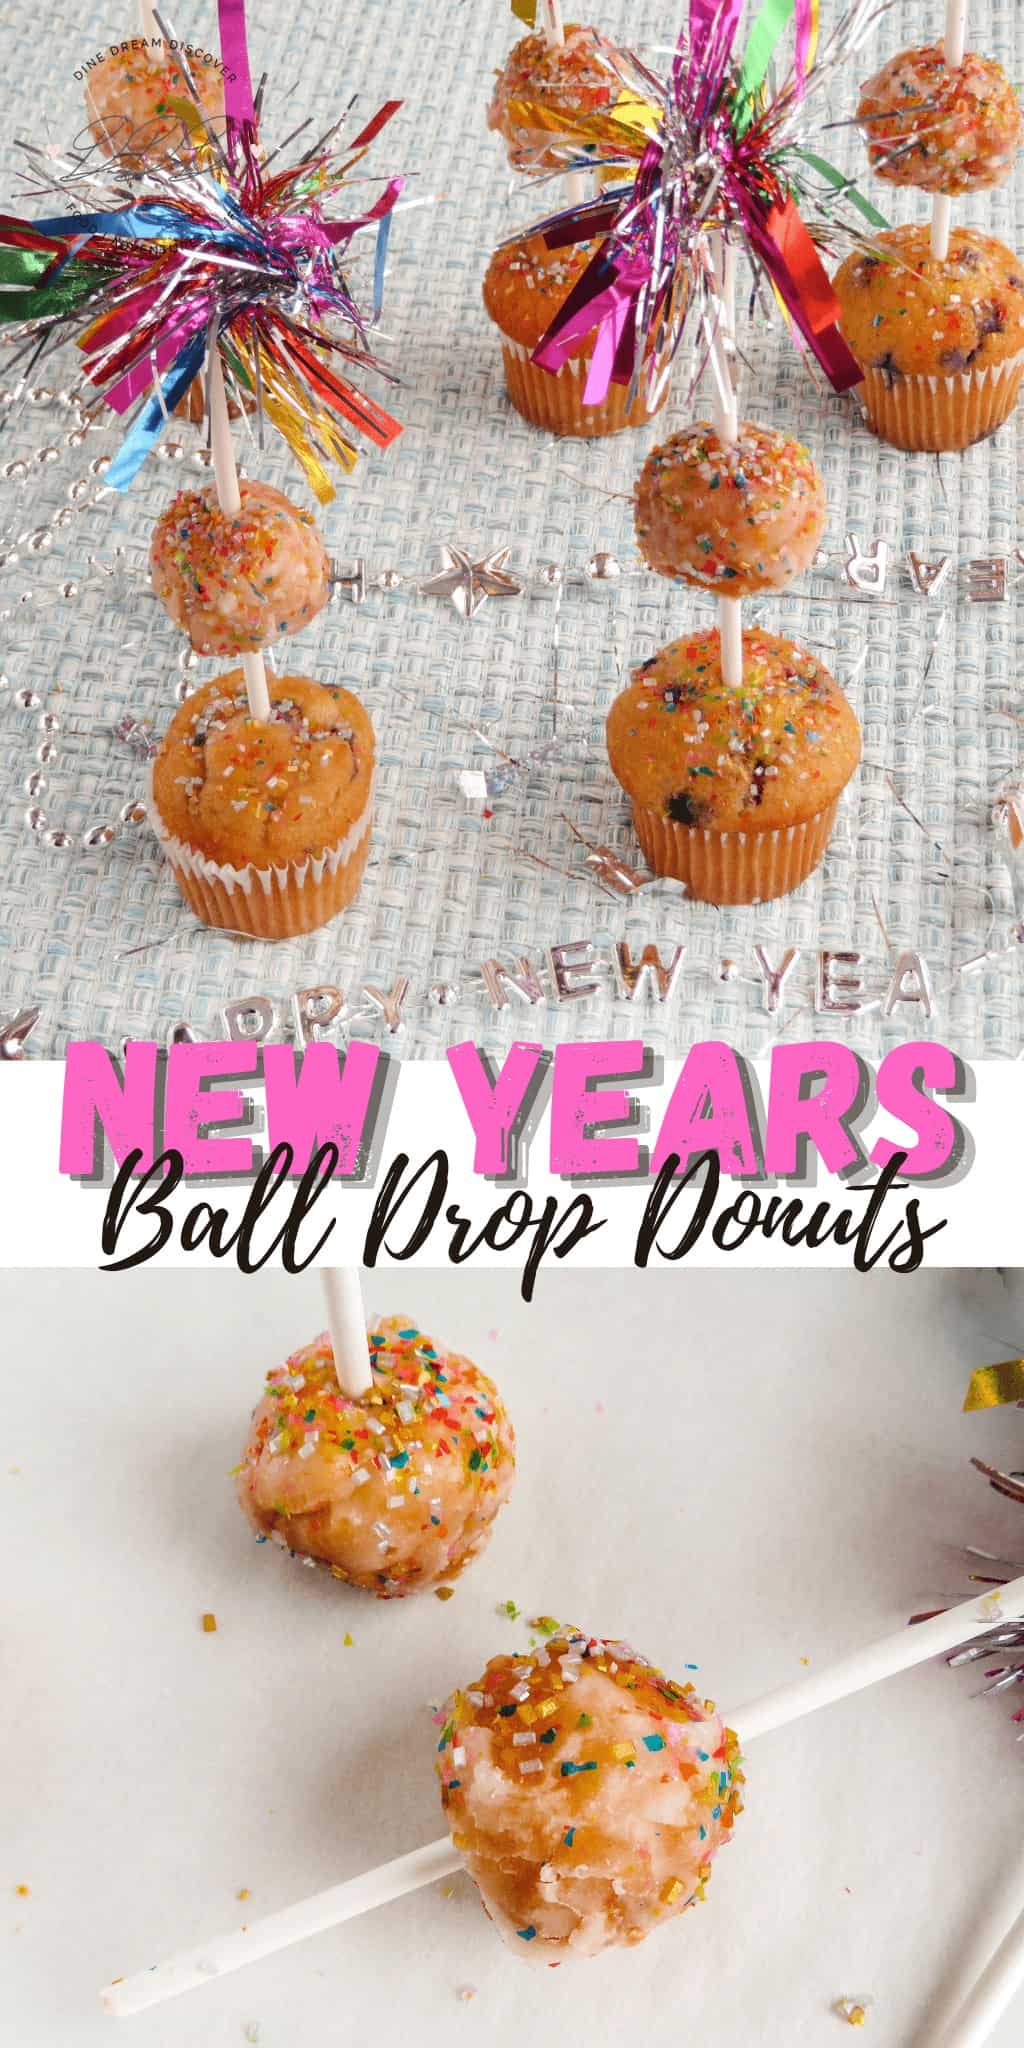 New Years Eve Ball Drop Donuts